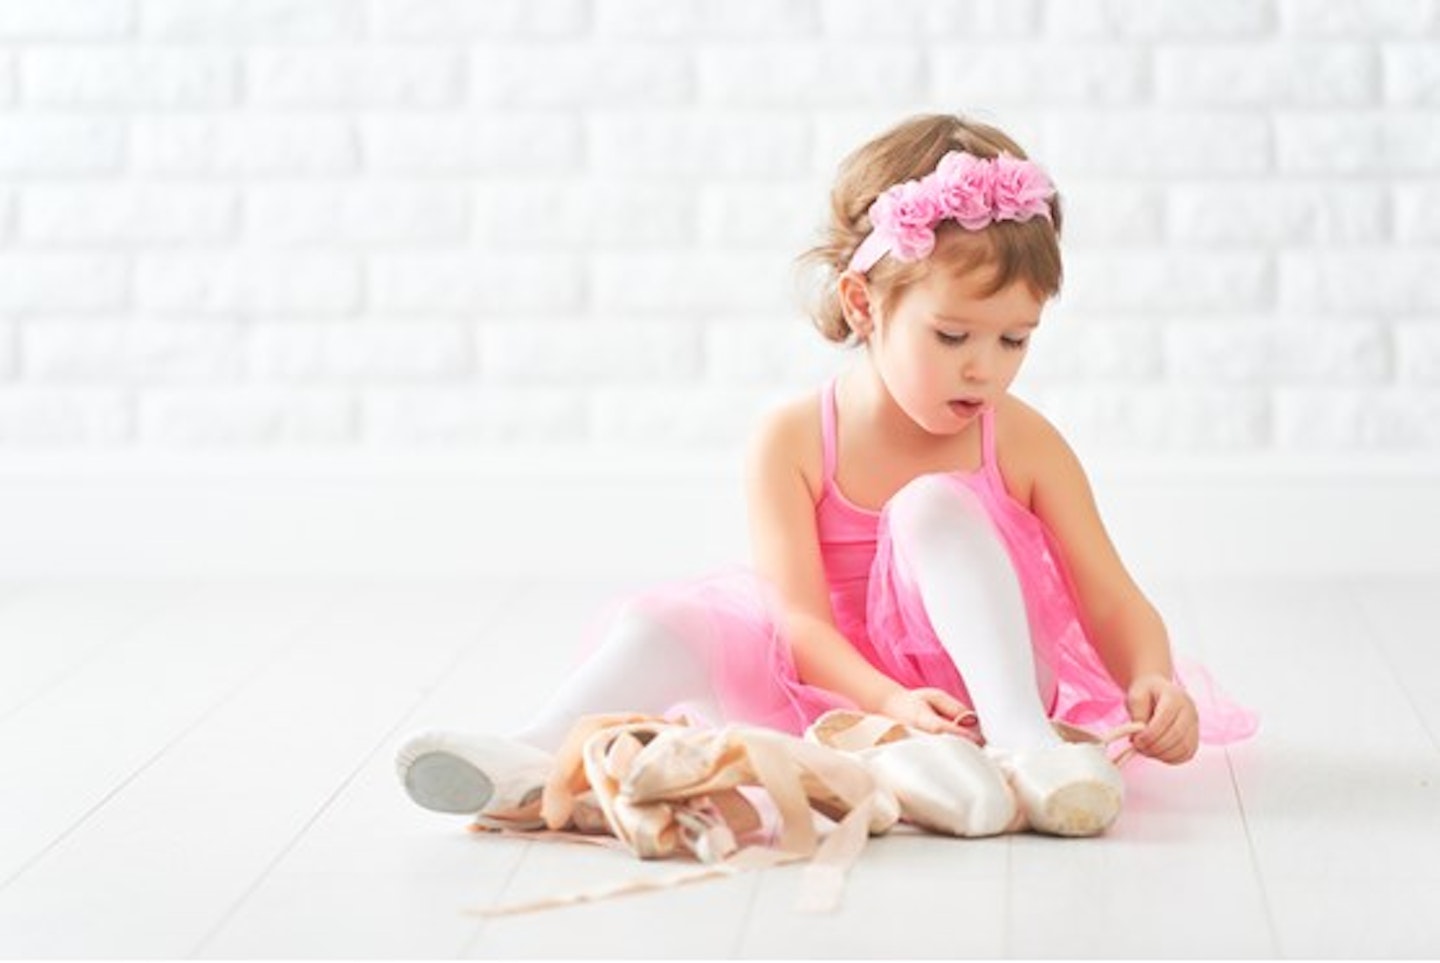 8) Ballet classes with babyballet.co.uk